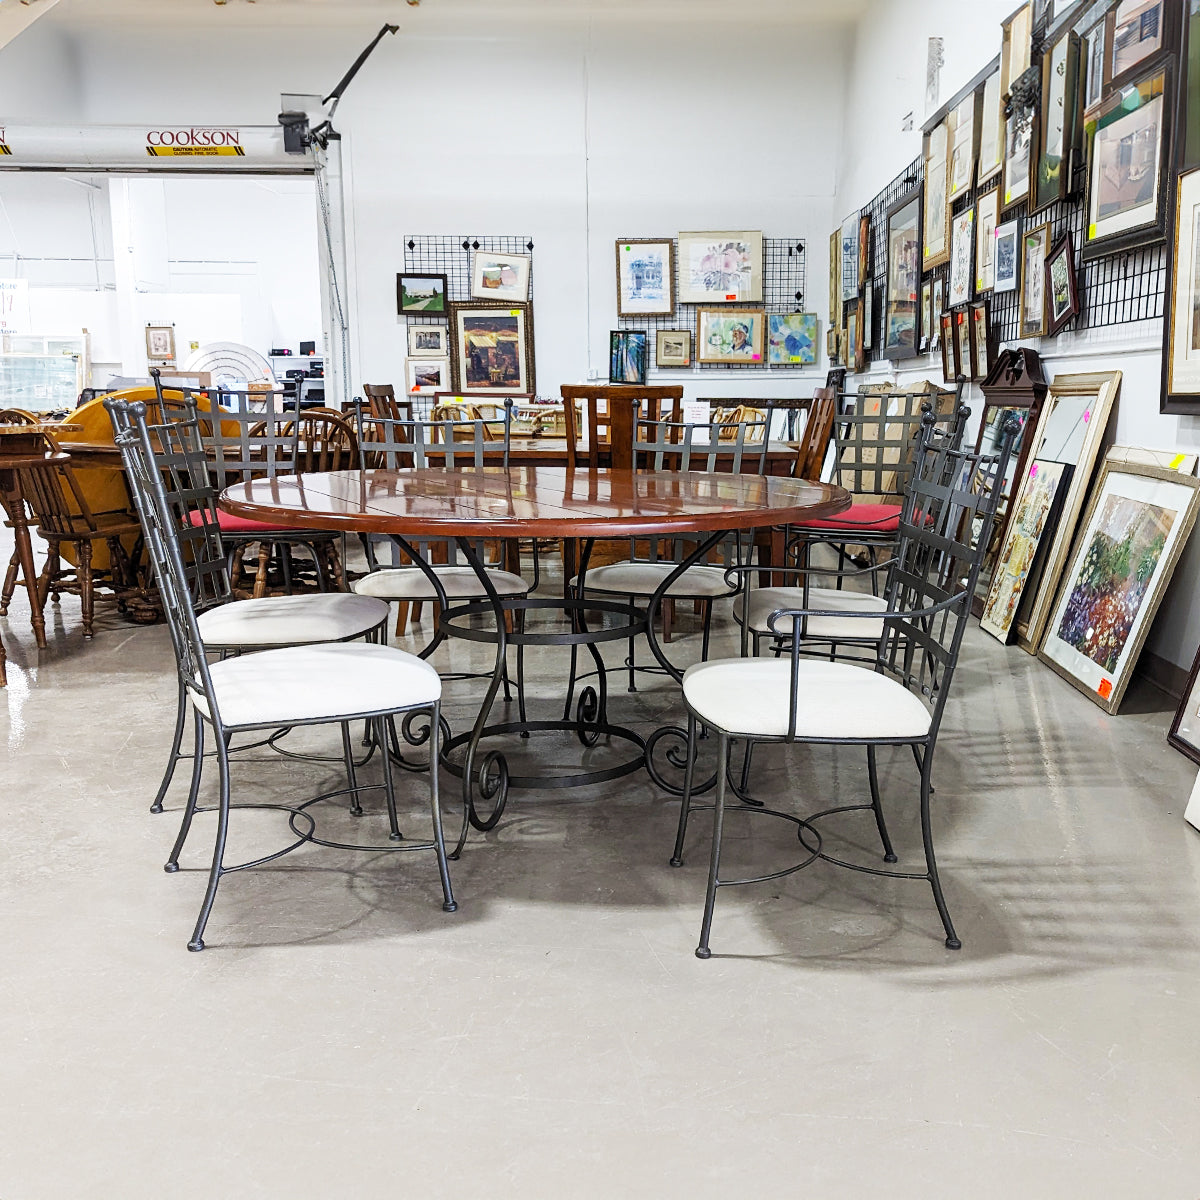 SET Large Round Mahogany Wrought Iron Table + 6 Chairs, 2 Barstools - Habroc - Online ReStore